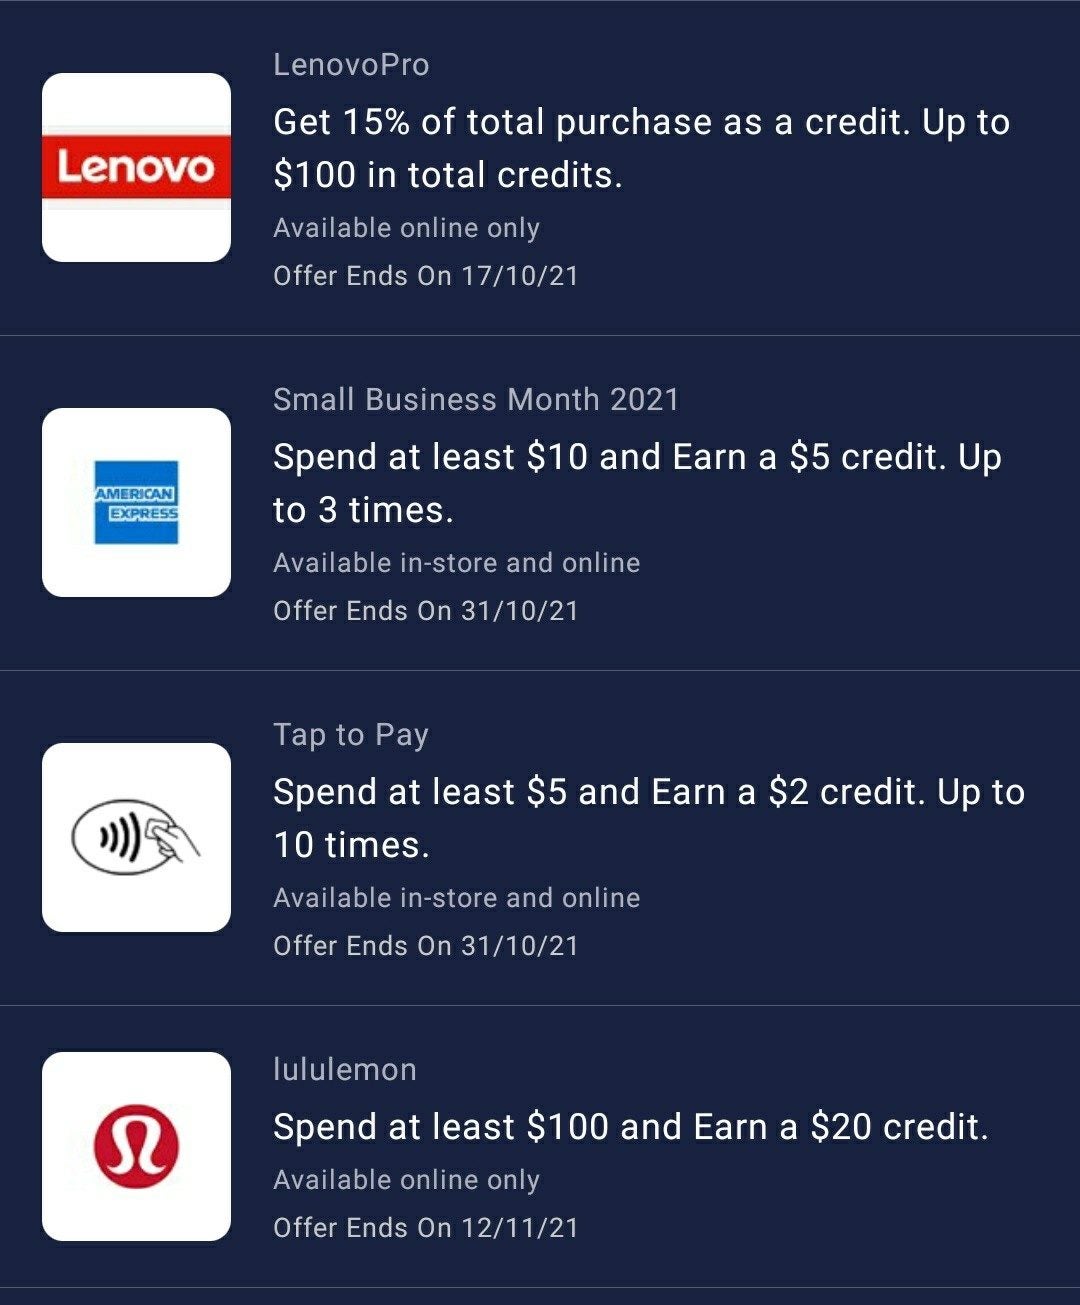 American Express] Lululemon - Spend at least $200 and earn a $50